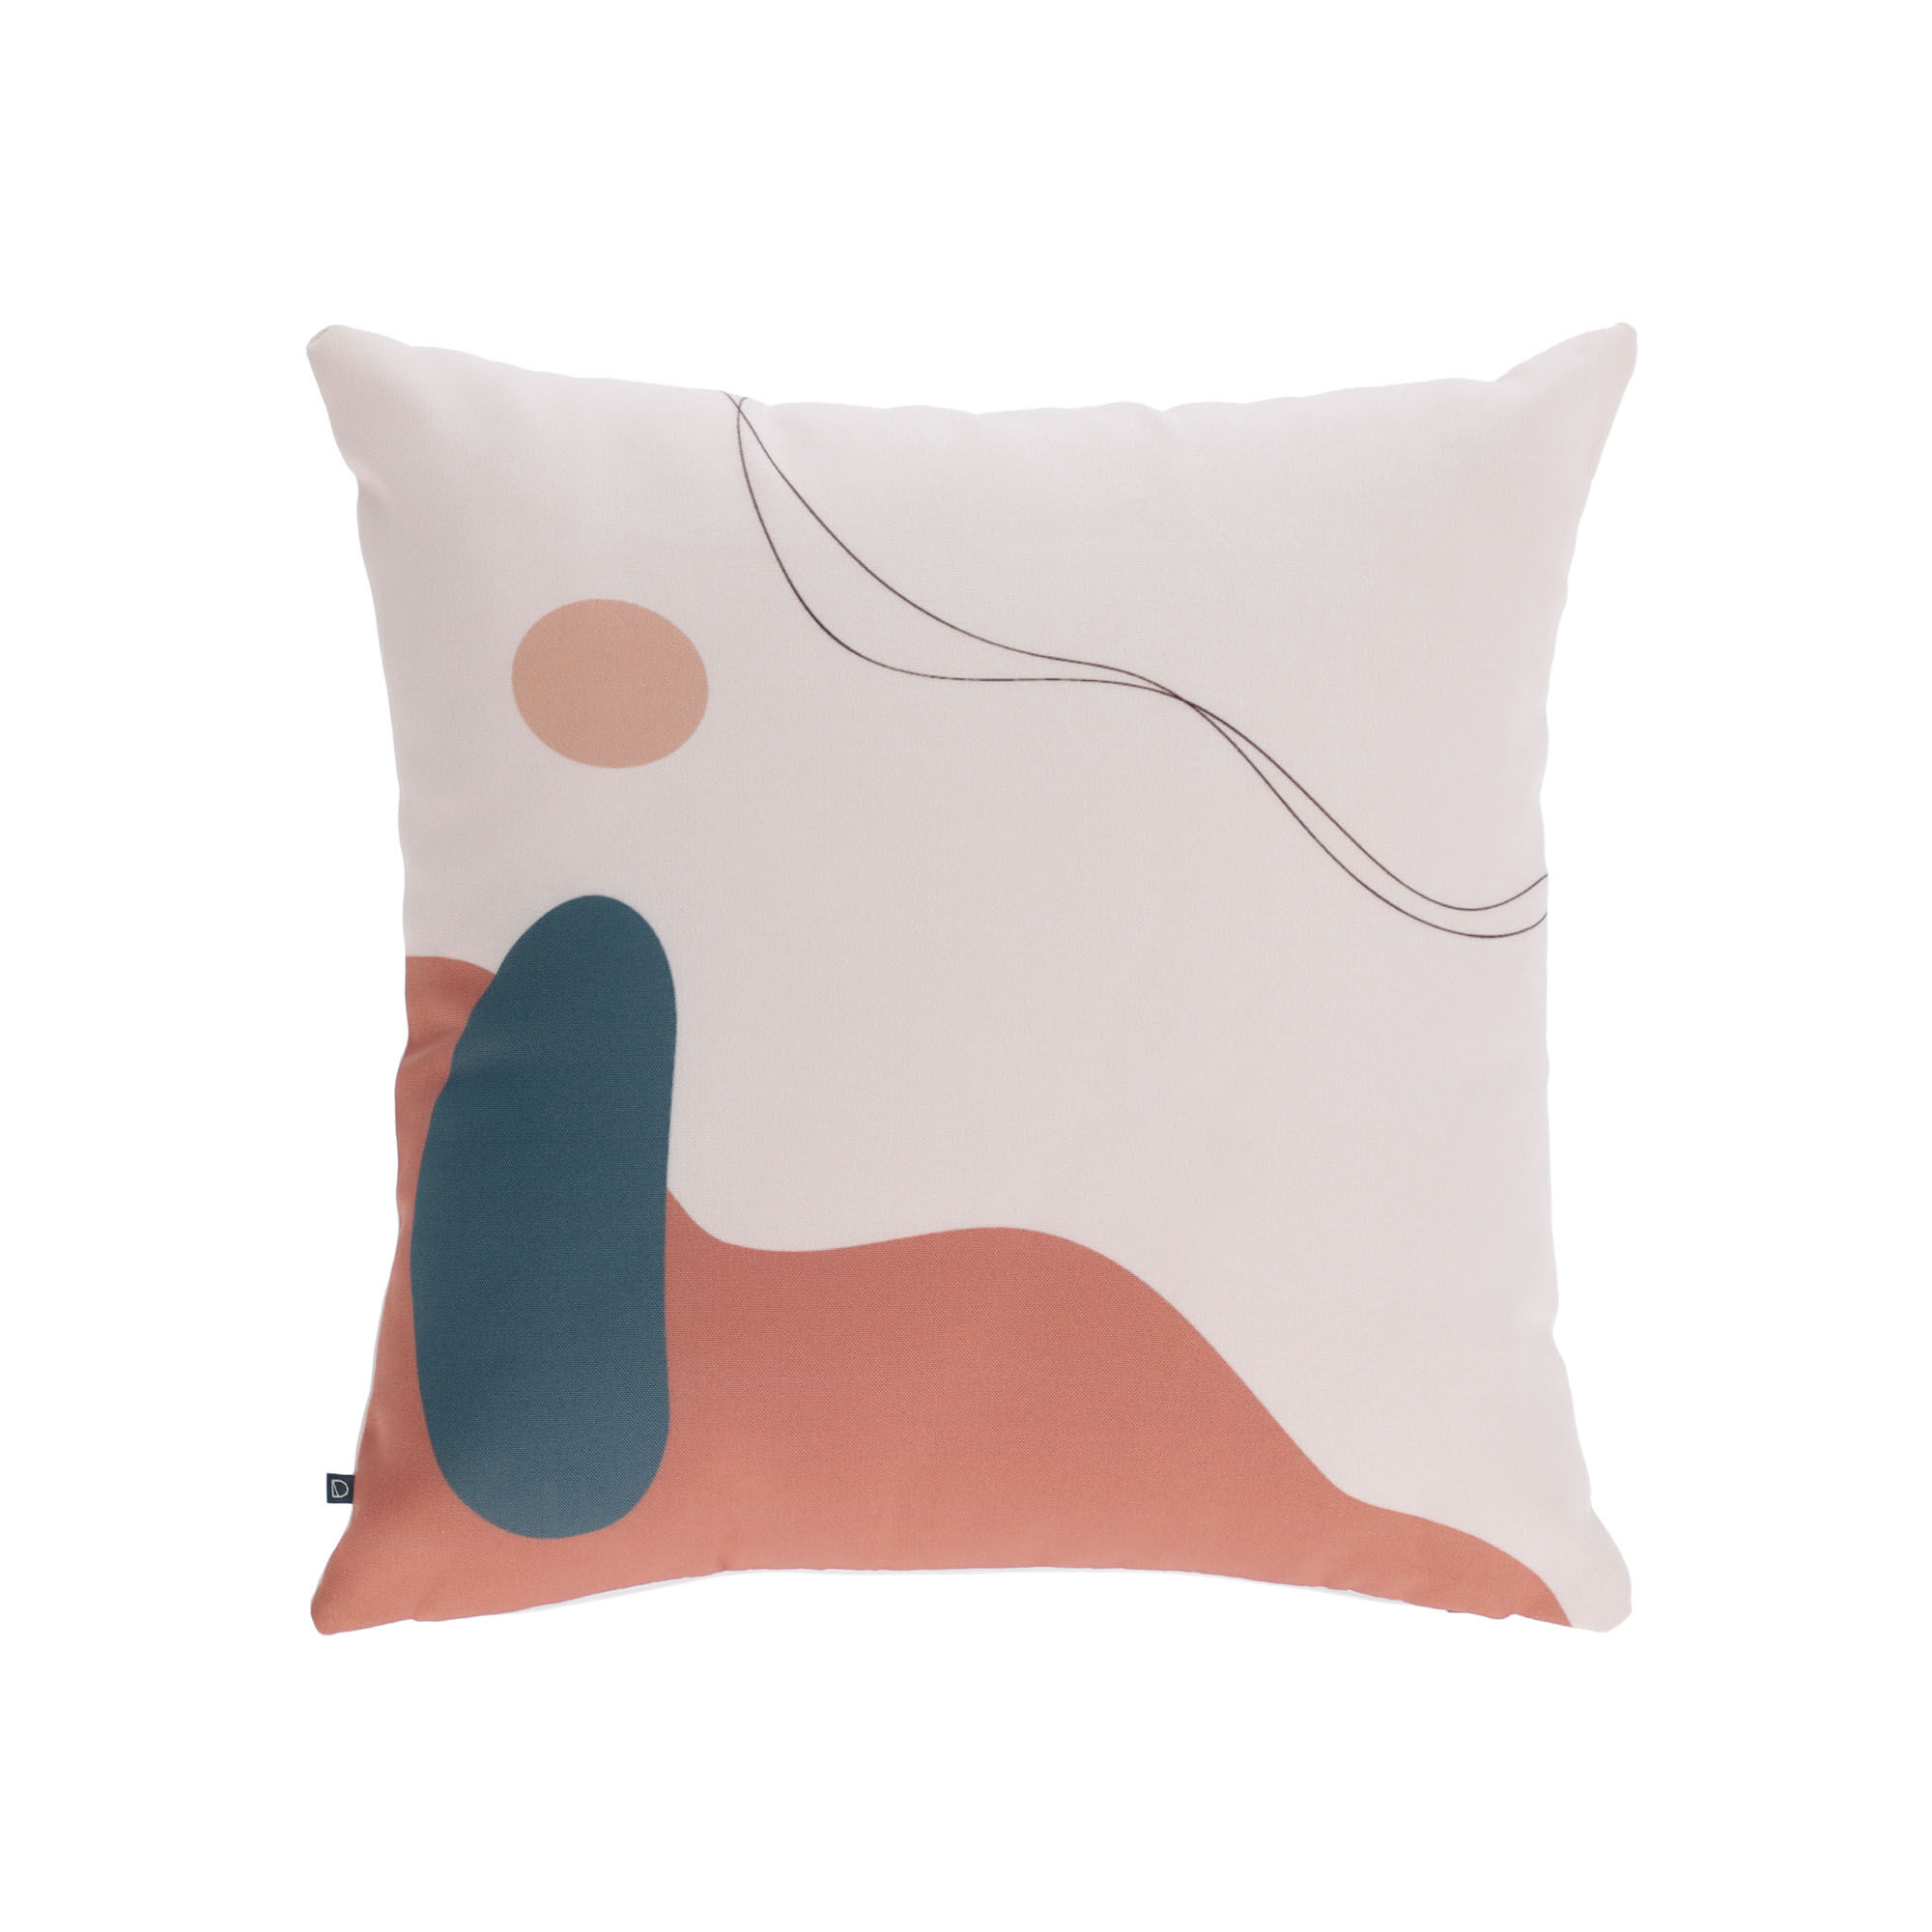 Kave Home Abish cushion cover with geometric shapes in beige 45 x 45 cm